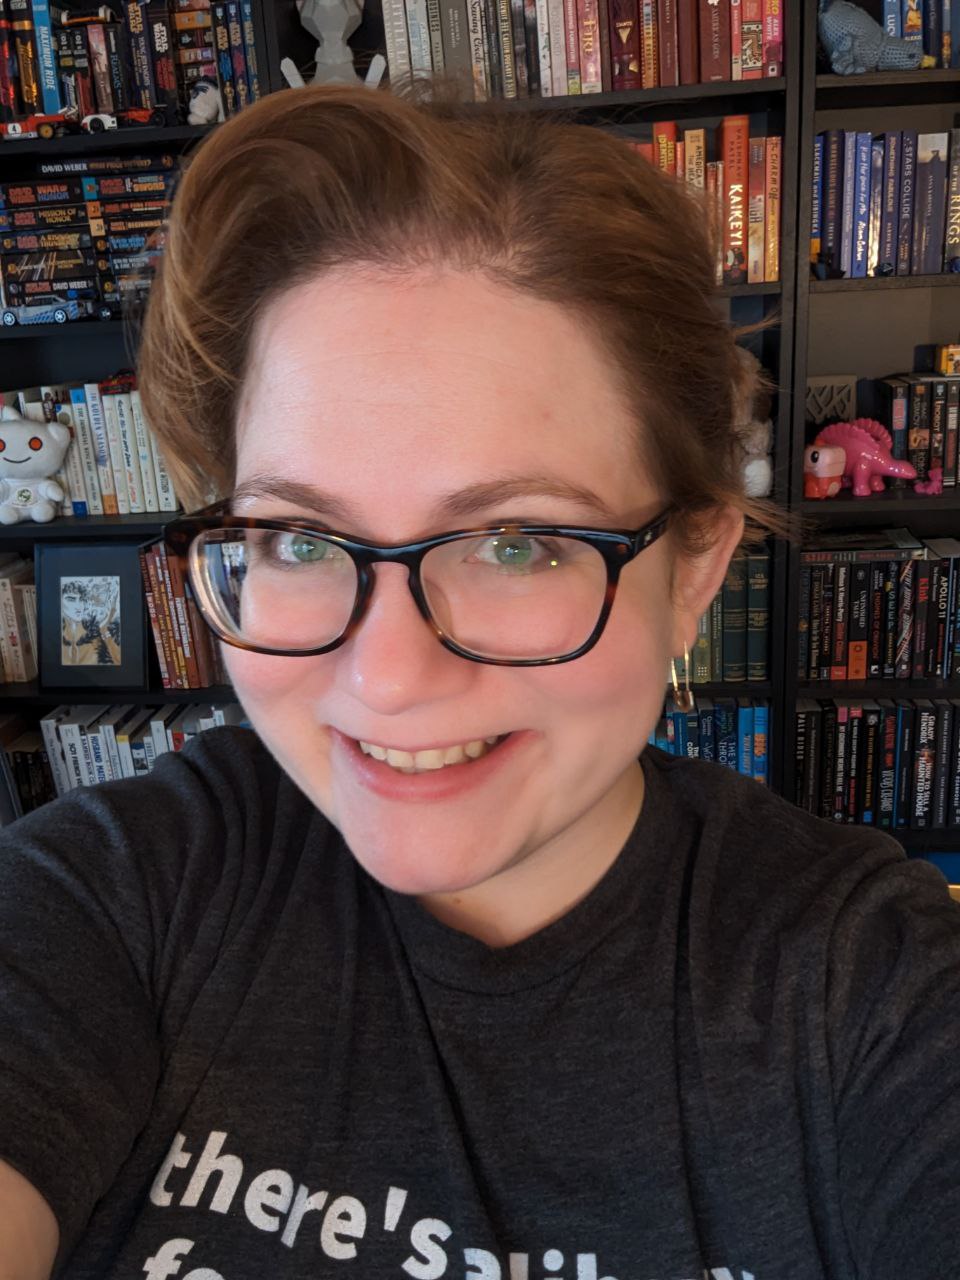 A picture of a woman in her early thirties looking at the camera. Her reddish hair is neatly coiffed and she's smiling at the camera in front of bookshelves.